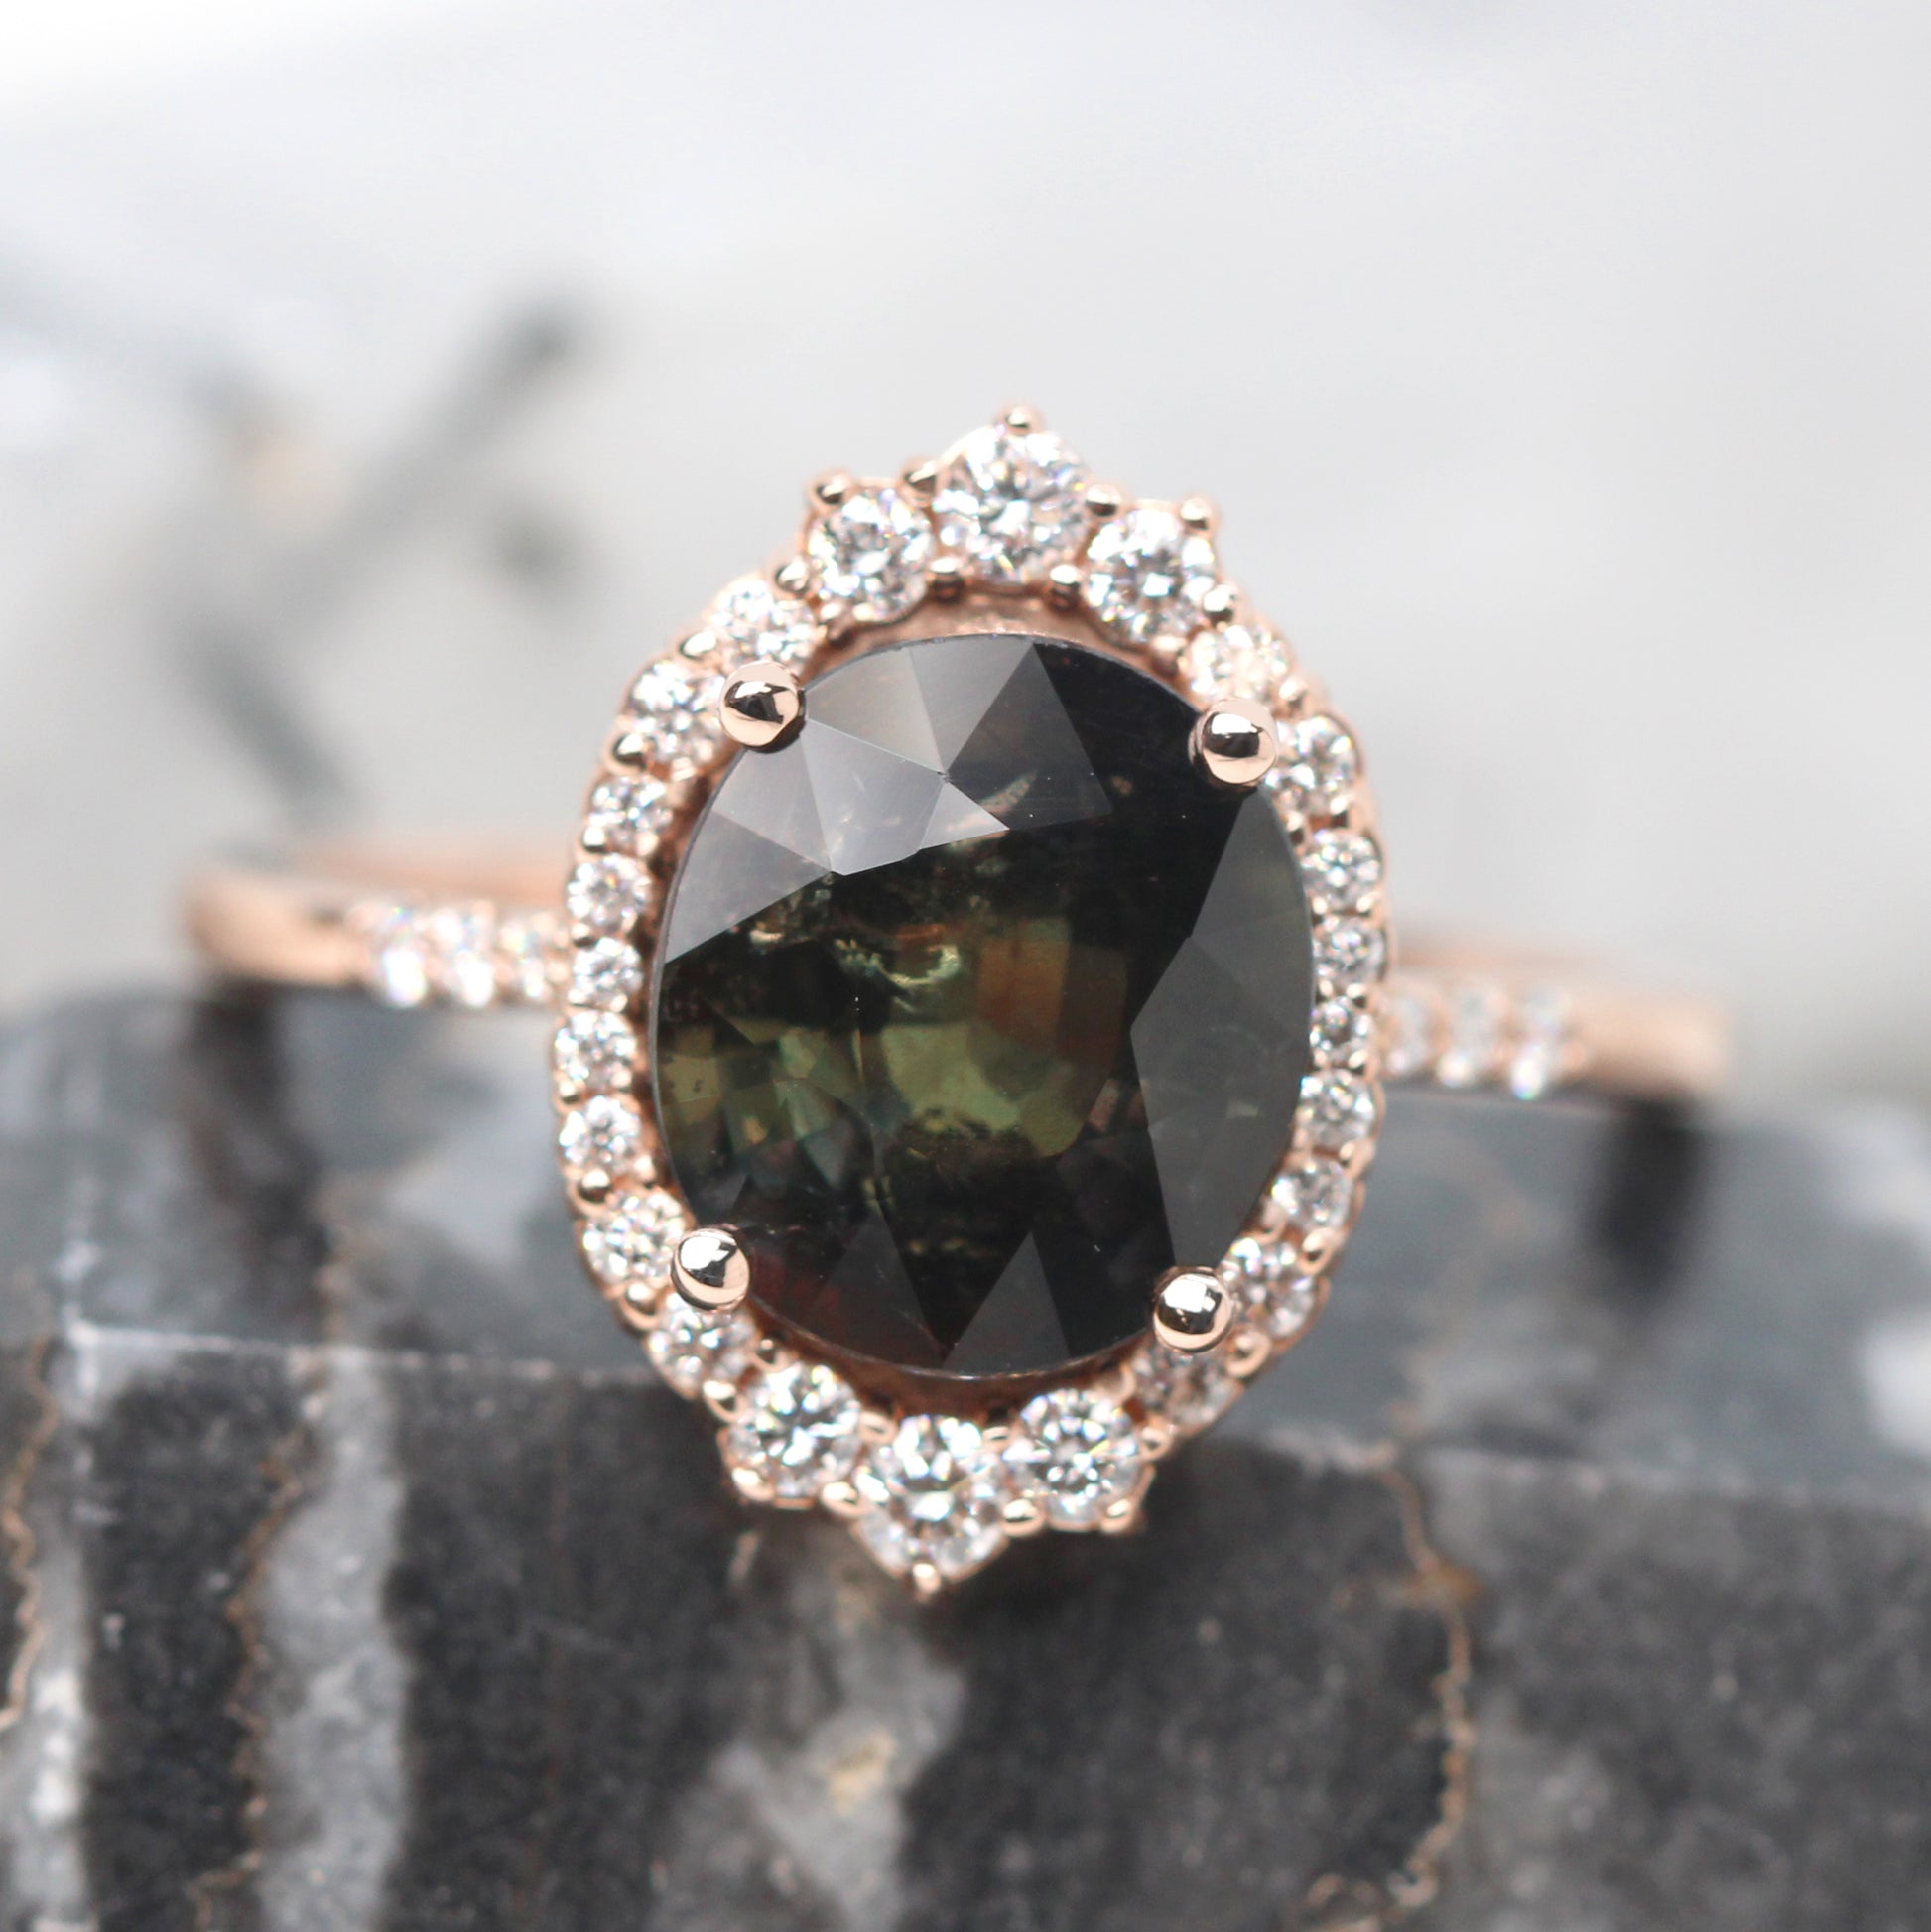 Grace Ring with a 4.02 Carat Oval Dark Brown and Green Sapphire and White Accent Diamonds in 14k Rose Gold - Ready to Size and Ship - Midwinter Co. Alternative Bridal Rings and Modern Fine Jewelry